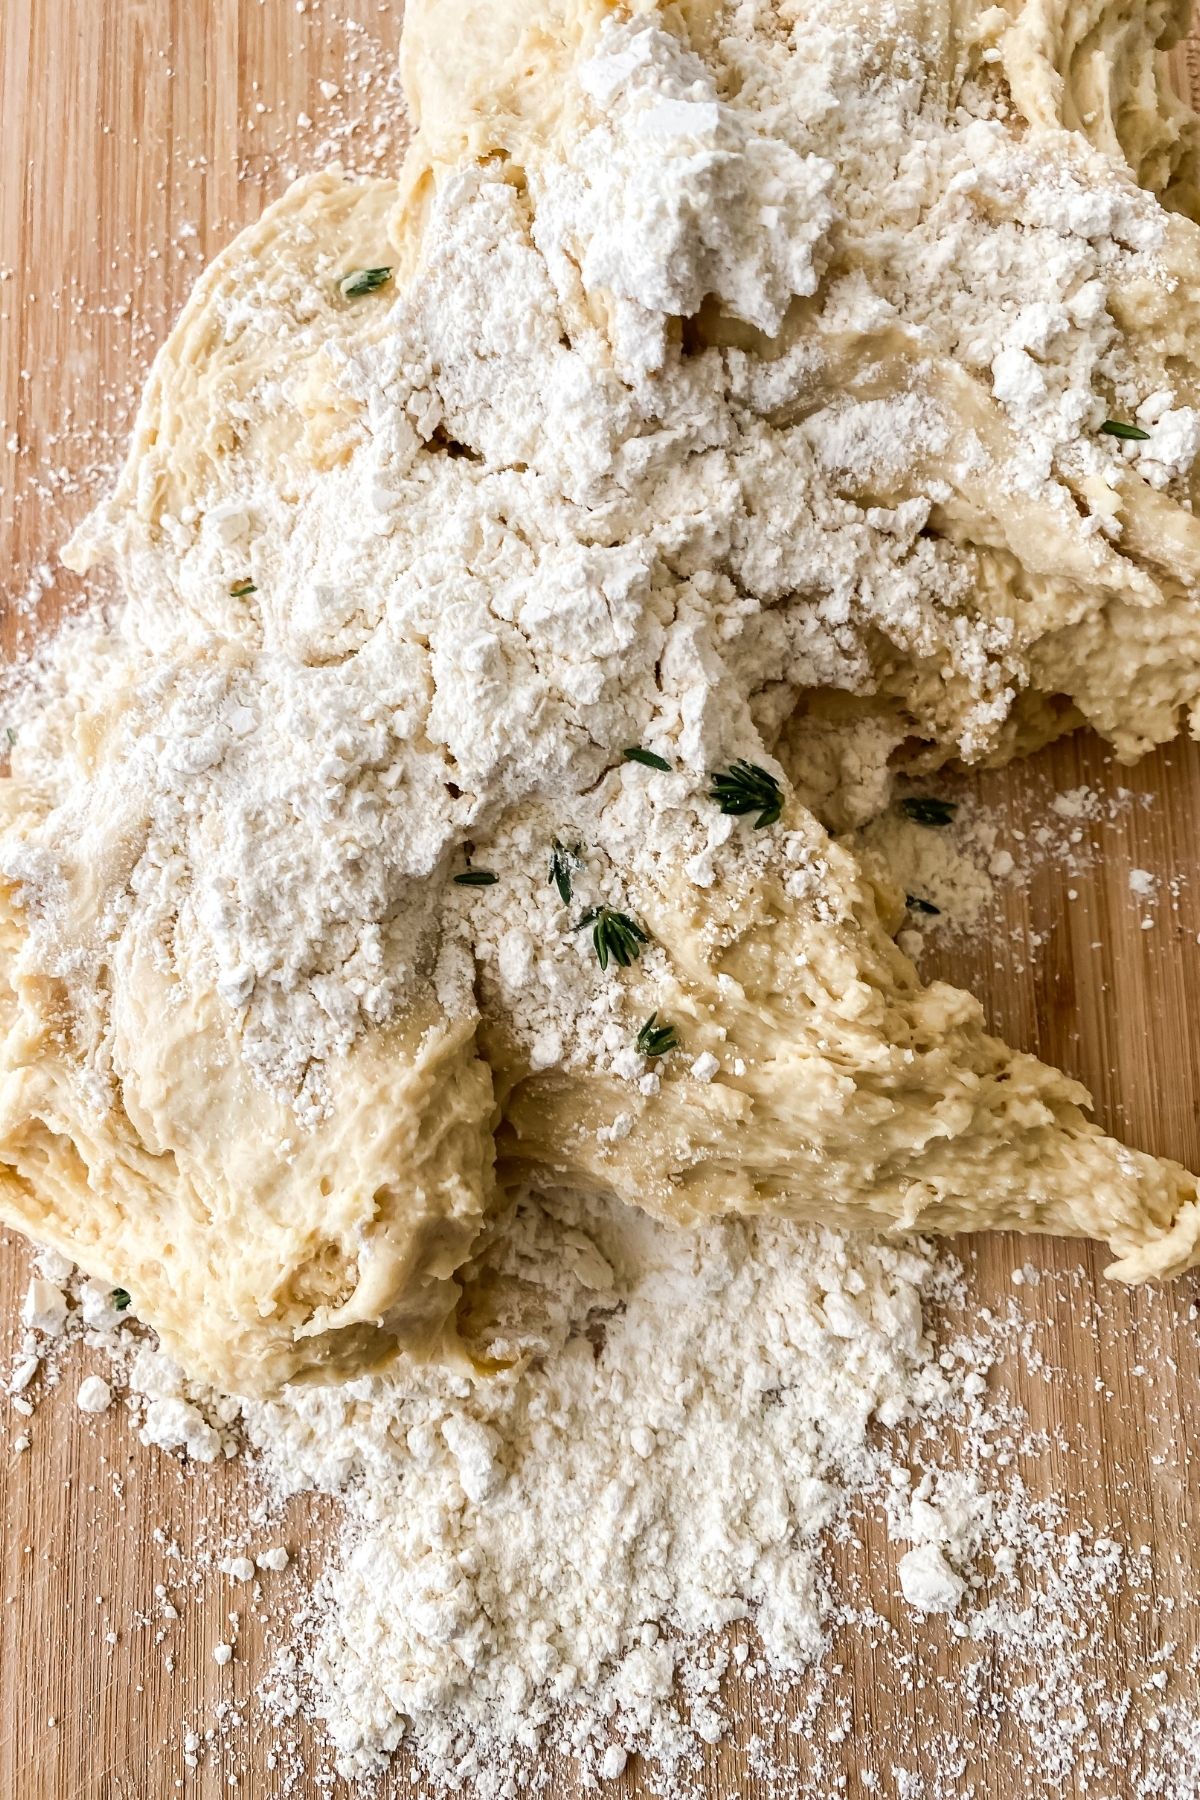 bread dough with herbs on cutting board